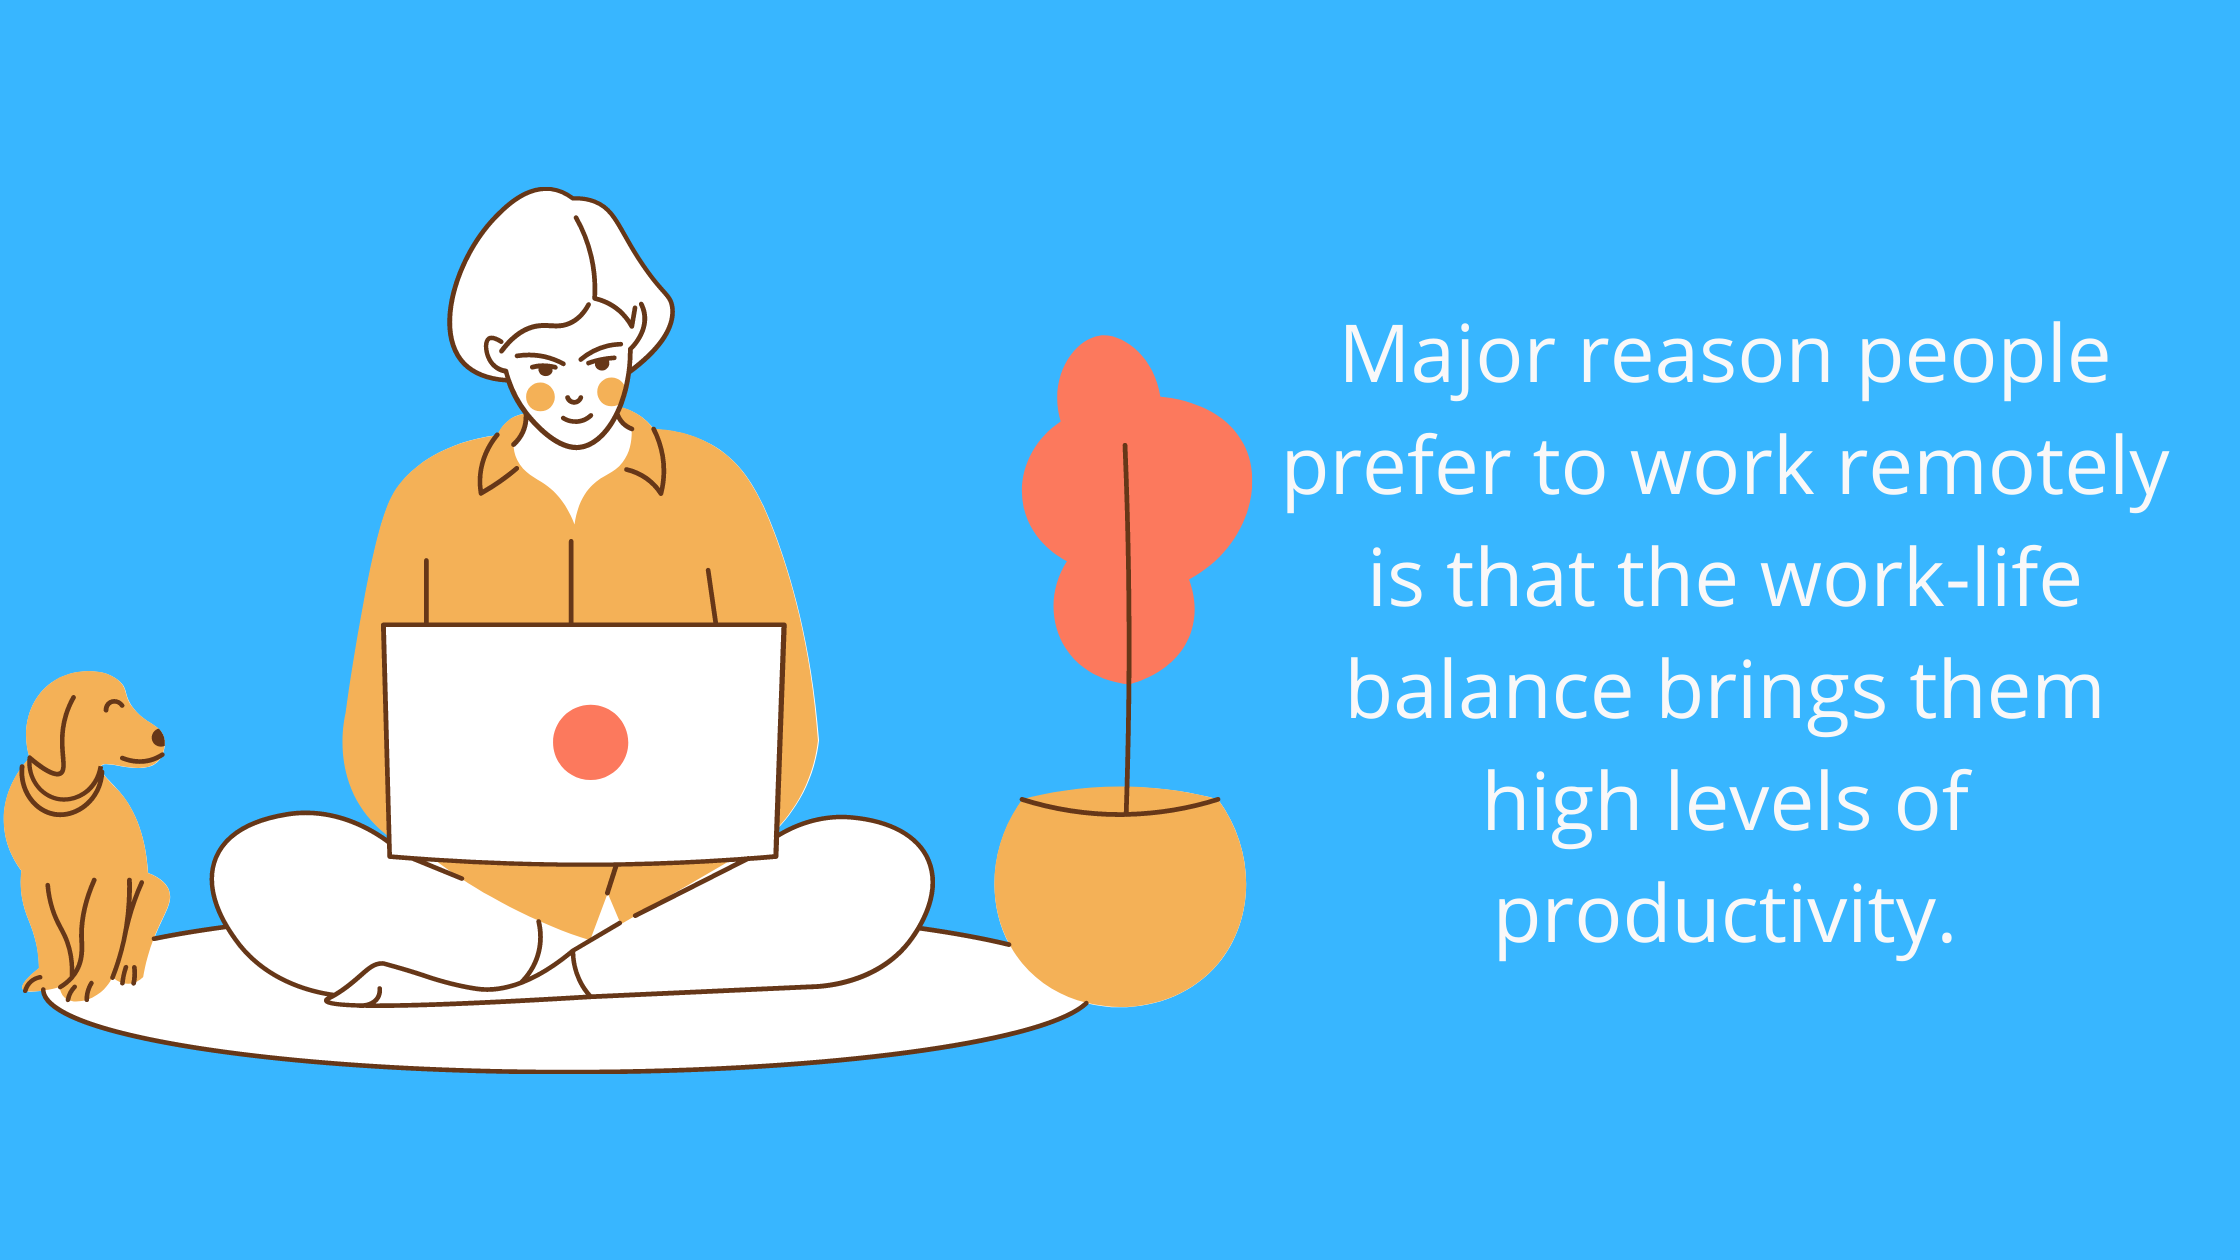 work-related stress and remote work productivity stats and facts